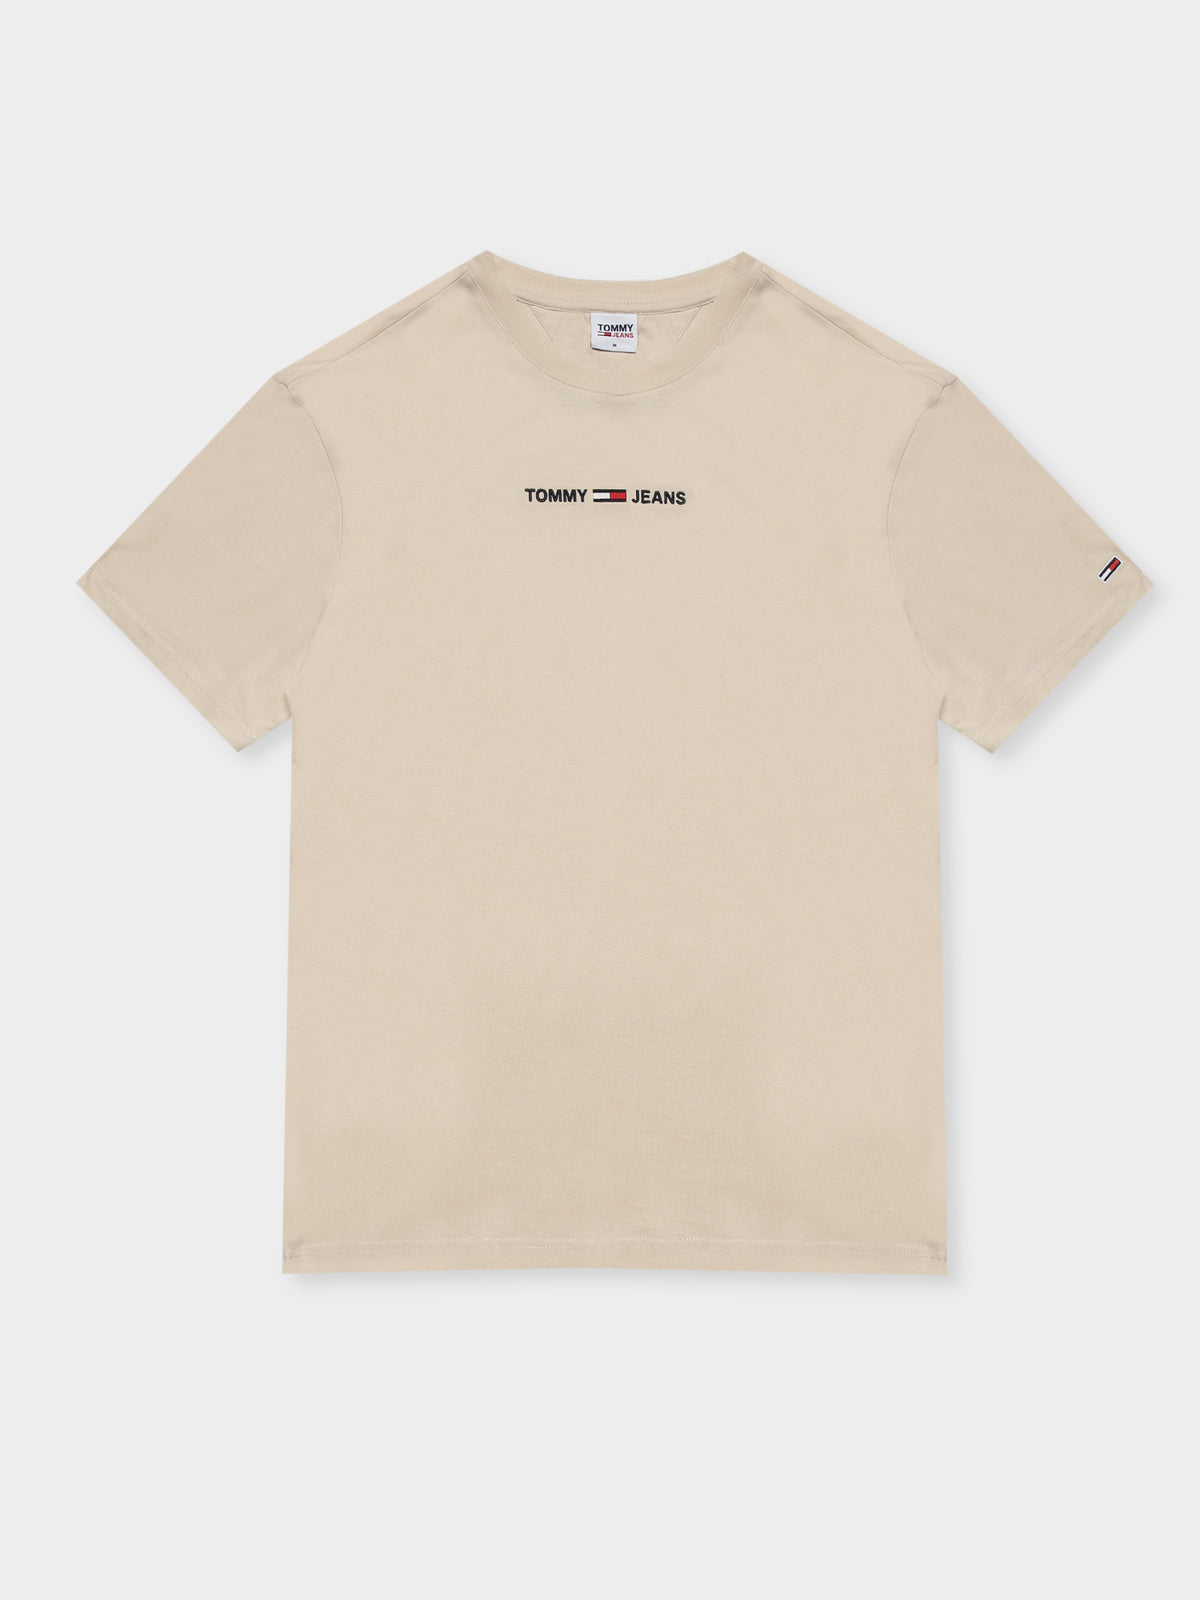 Small Text T-Shirt in Smooth Stone